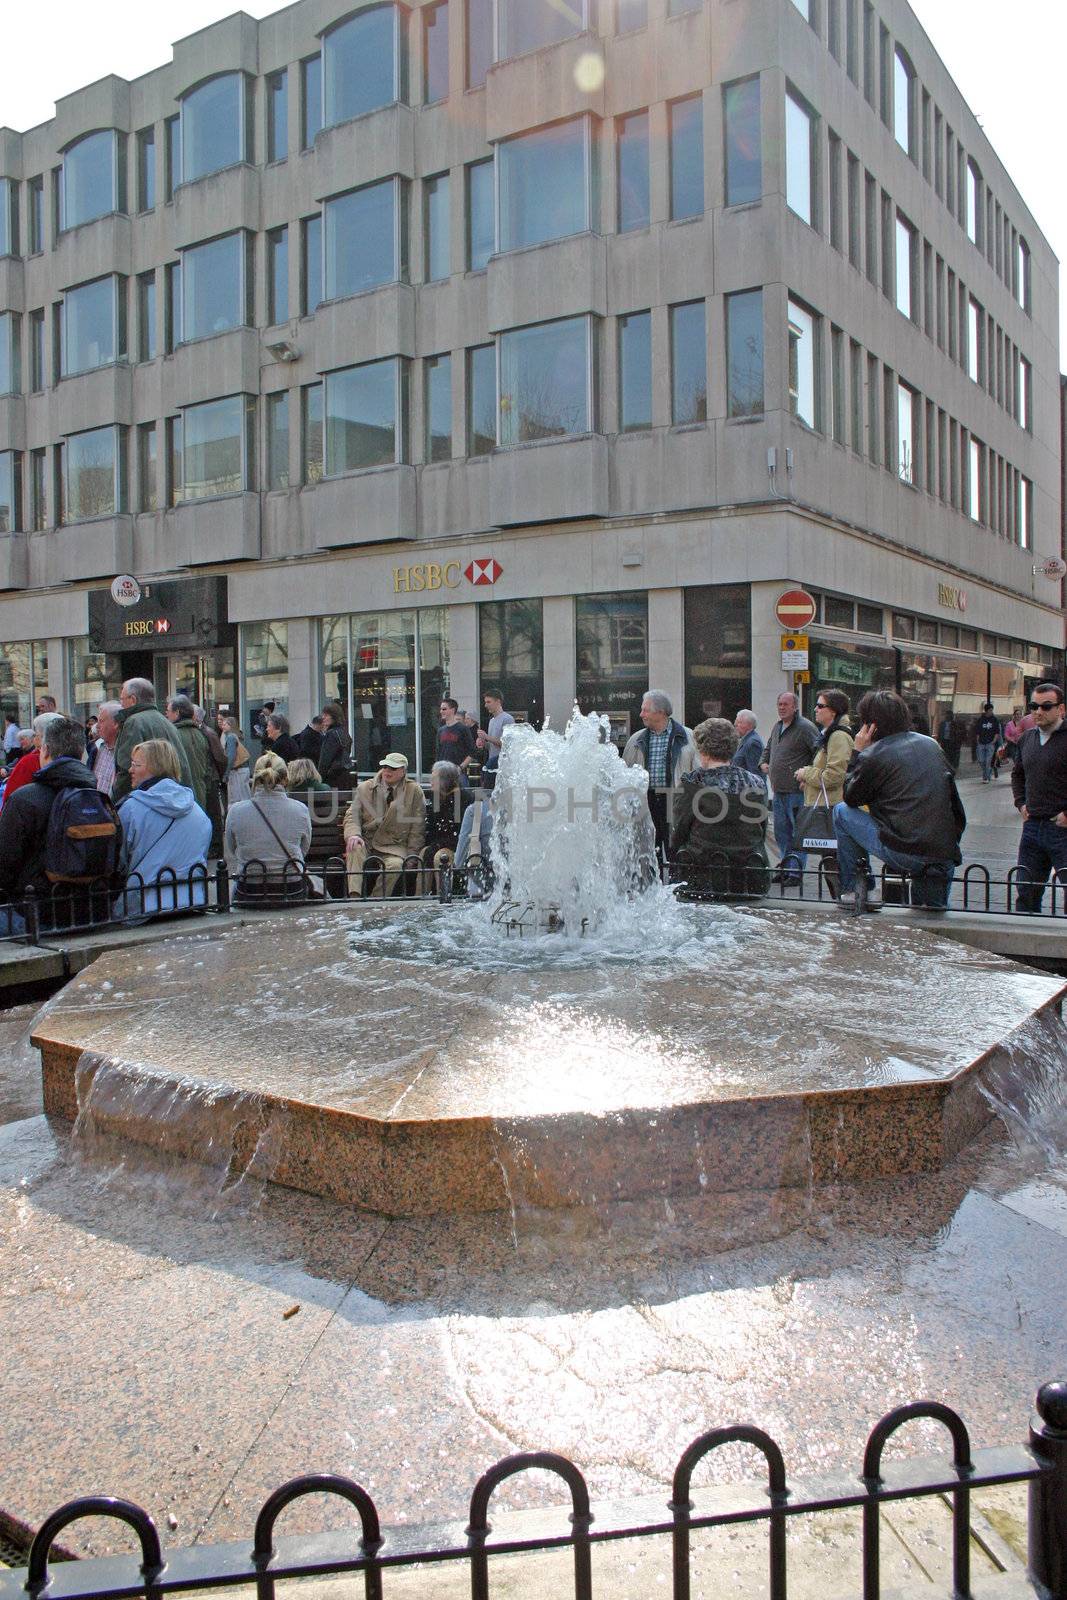 Shoppers Outside Fountain and HSBC in York UK by green308